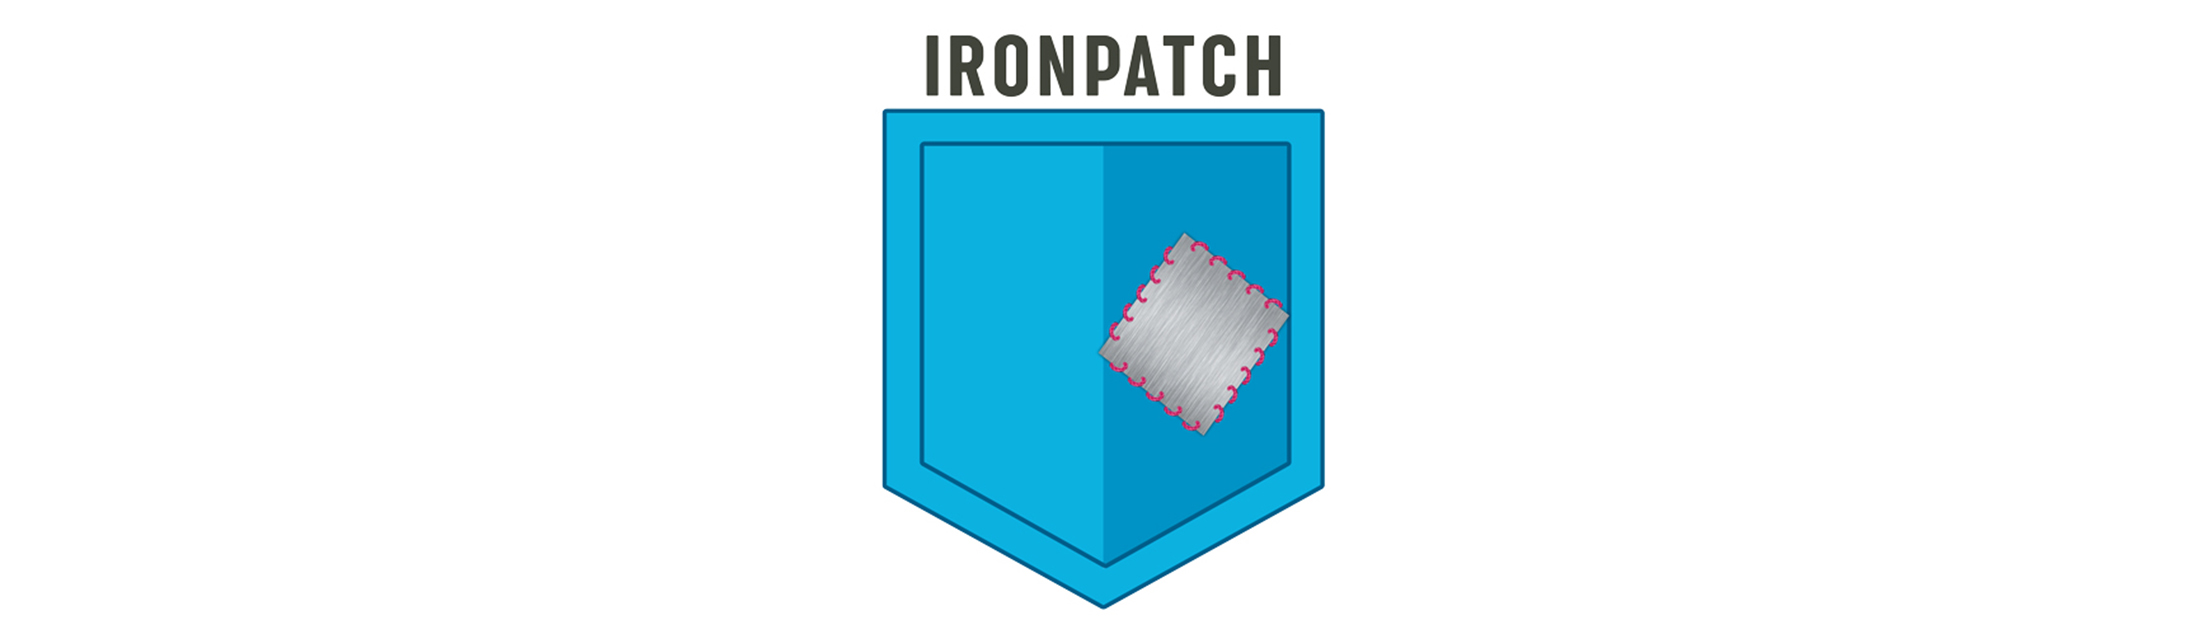 A logo depicting a blue pocket with a silver sewn on patch, labeled "ironpatch".